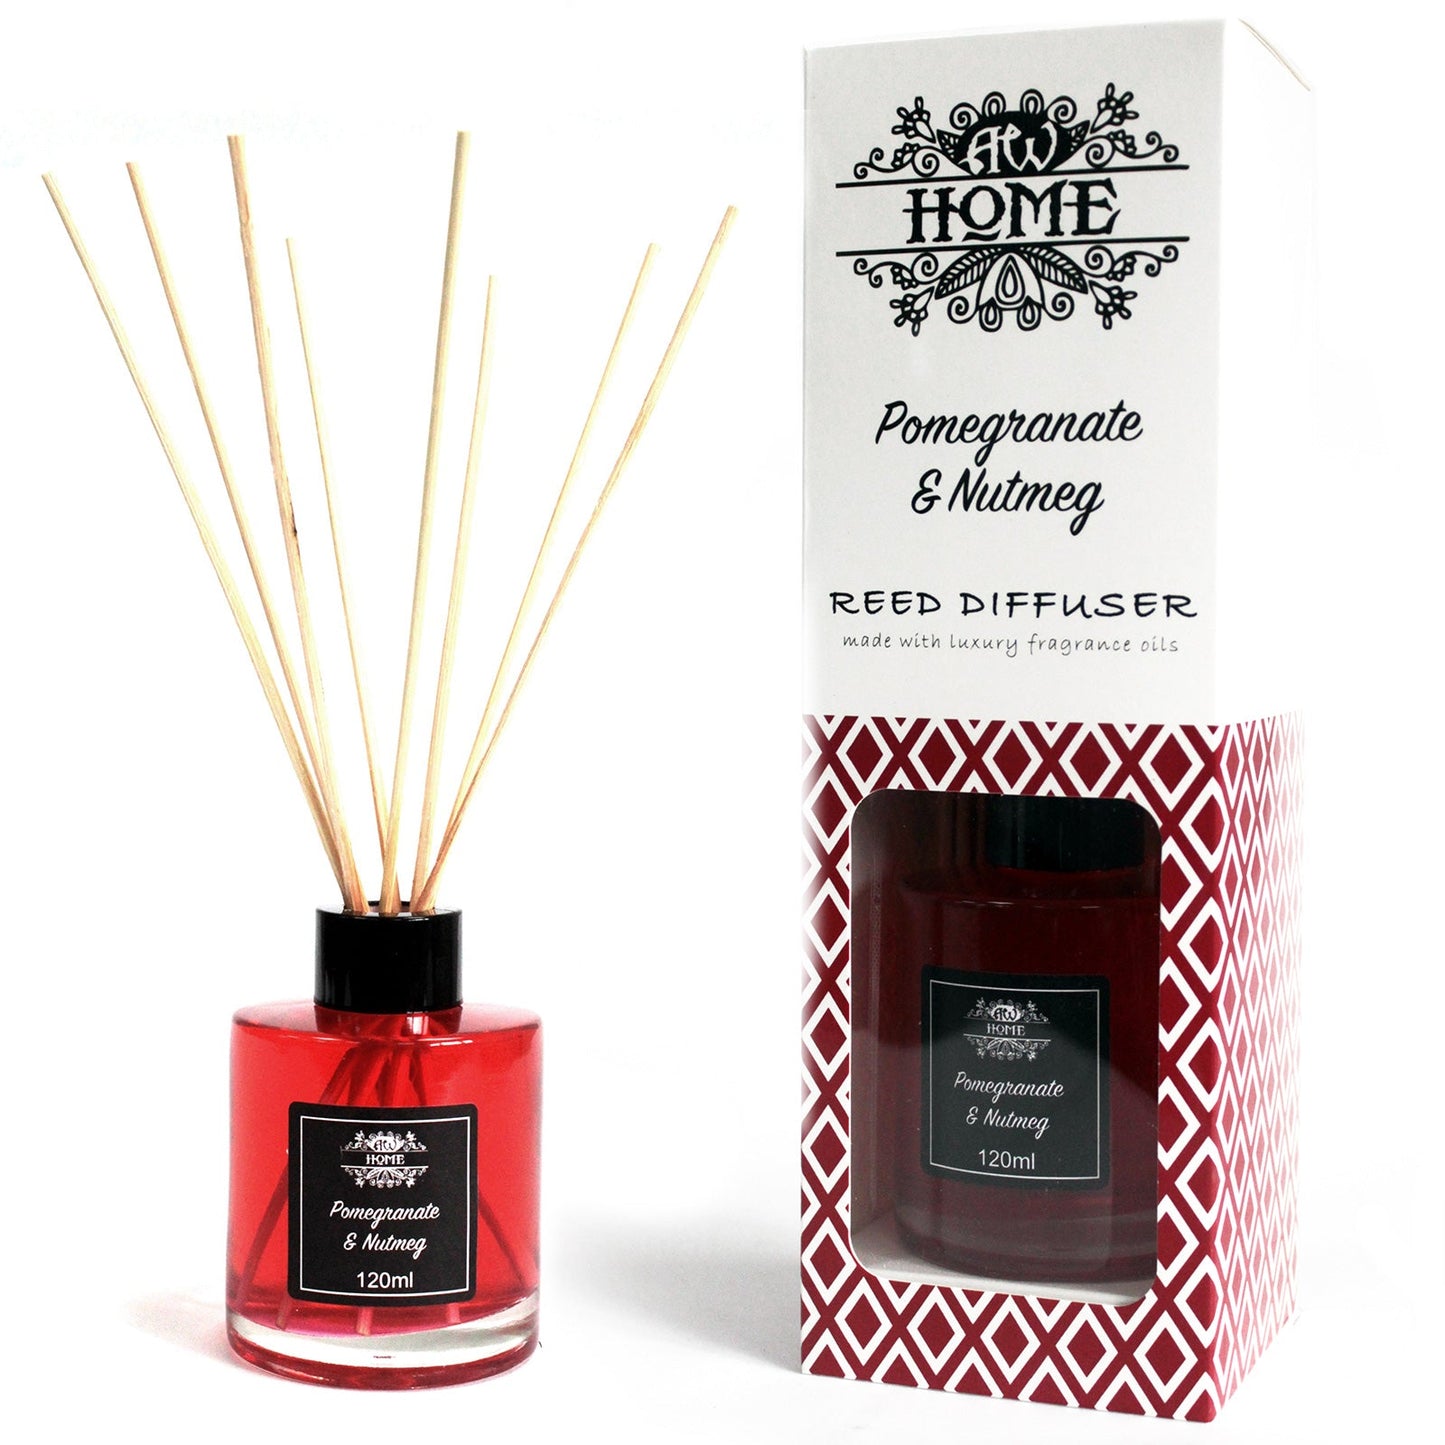 Home Fragrance Reed Diffuser - Various Fragrances - 120ml Home Fragrance Reed Diffusers - 120ml Soul Inspired Pomegranate & Nutmeg 